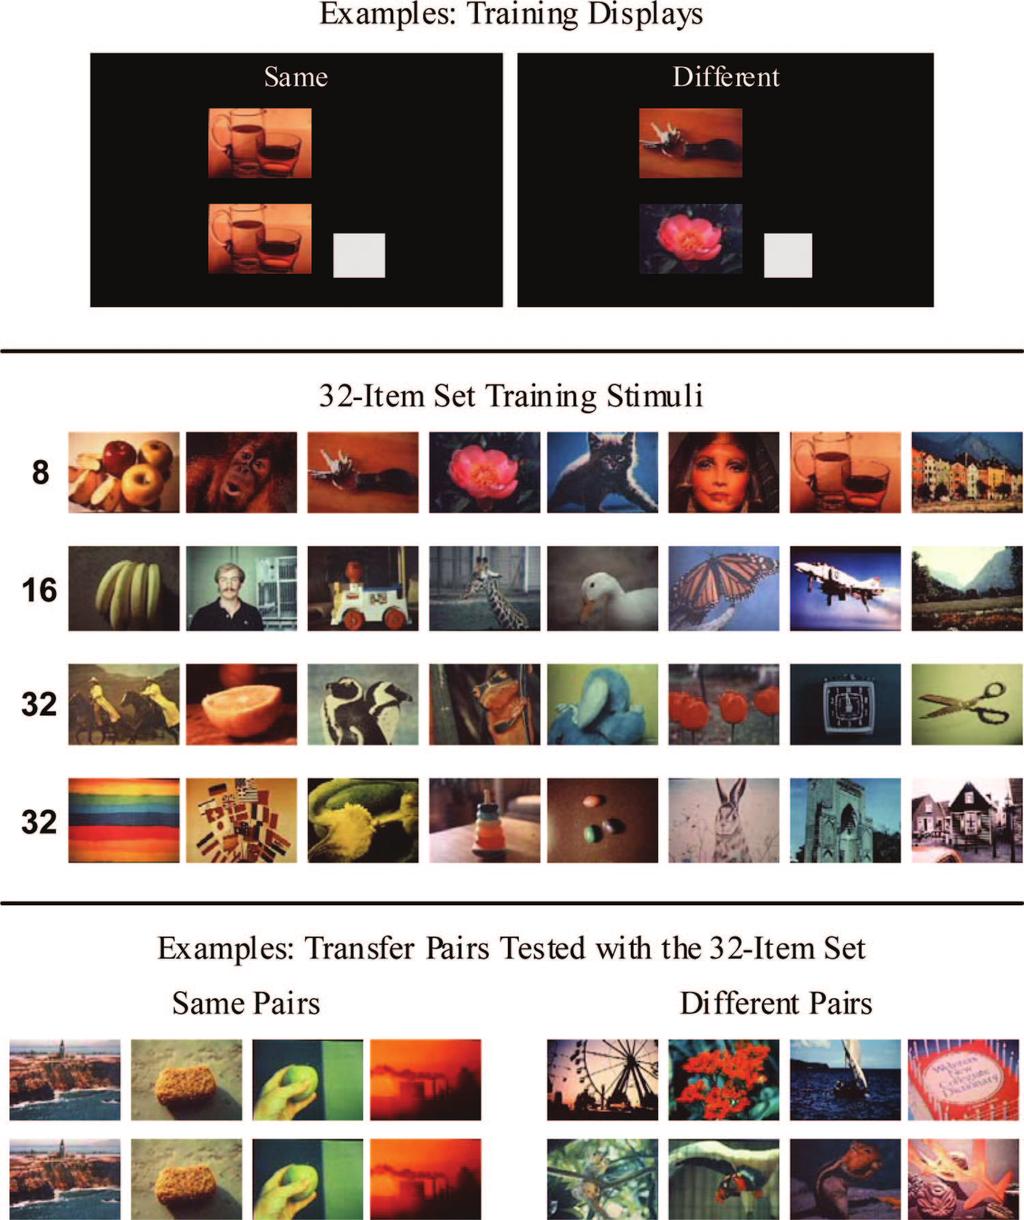 INITIAL-TRAINING CARRYOVER EFFECT 81 Figure 1. Top: Examples of same and different trial displays. Middle: The 32 pictures of the 32-item training set.